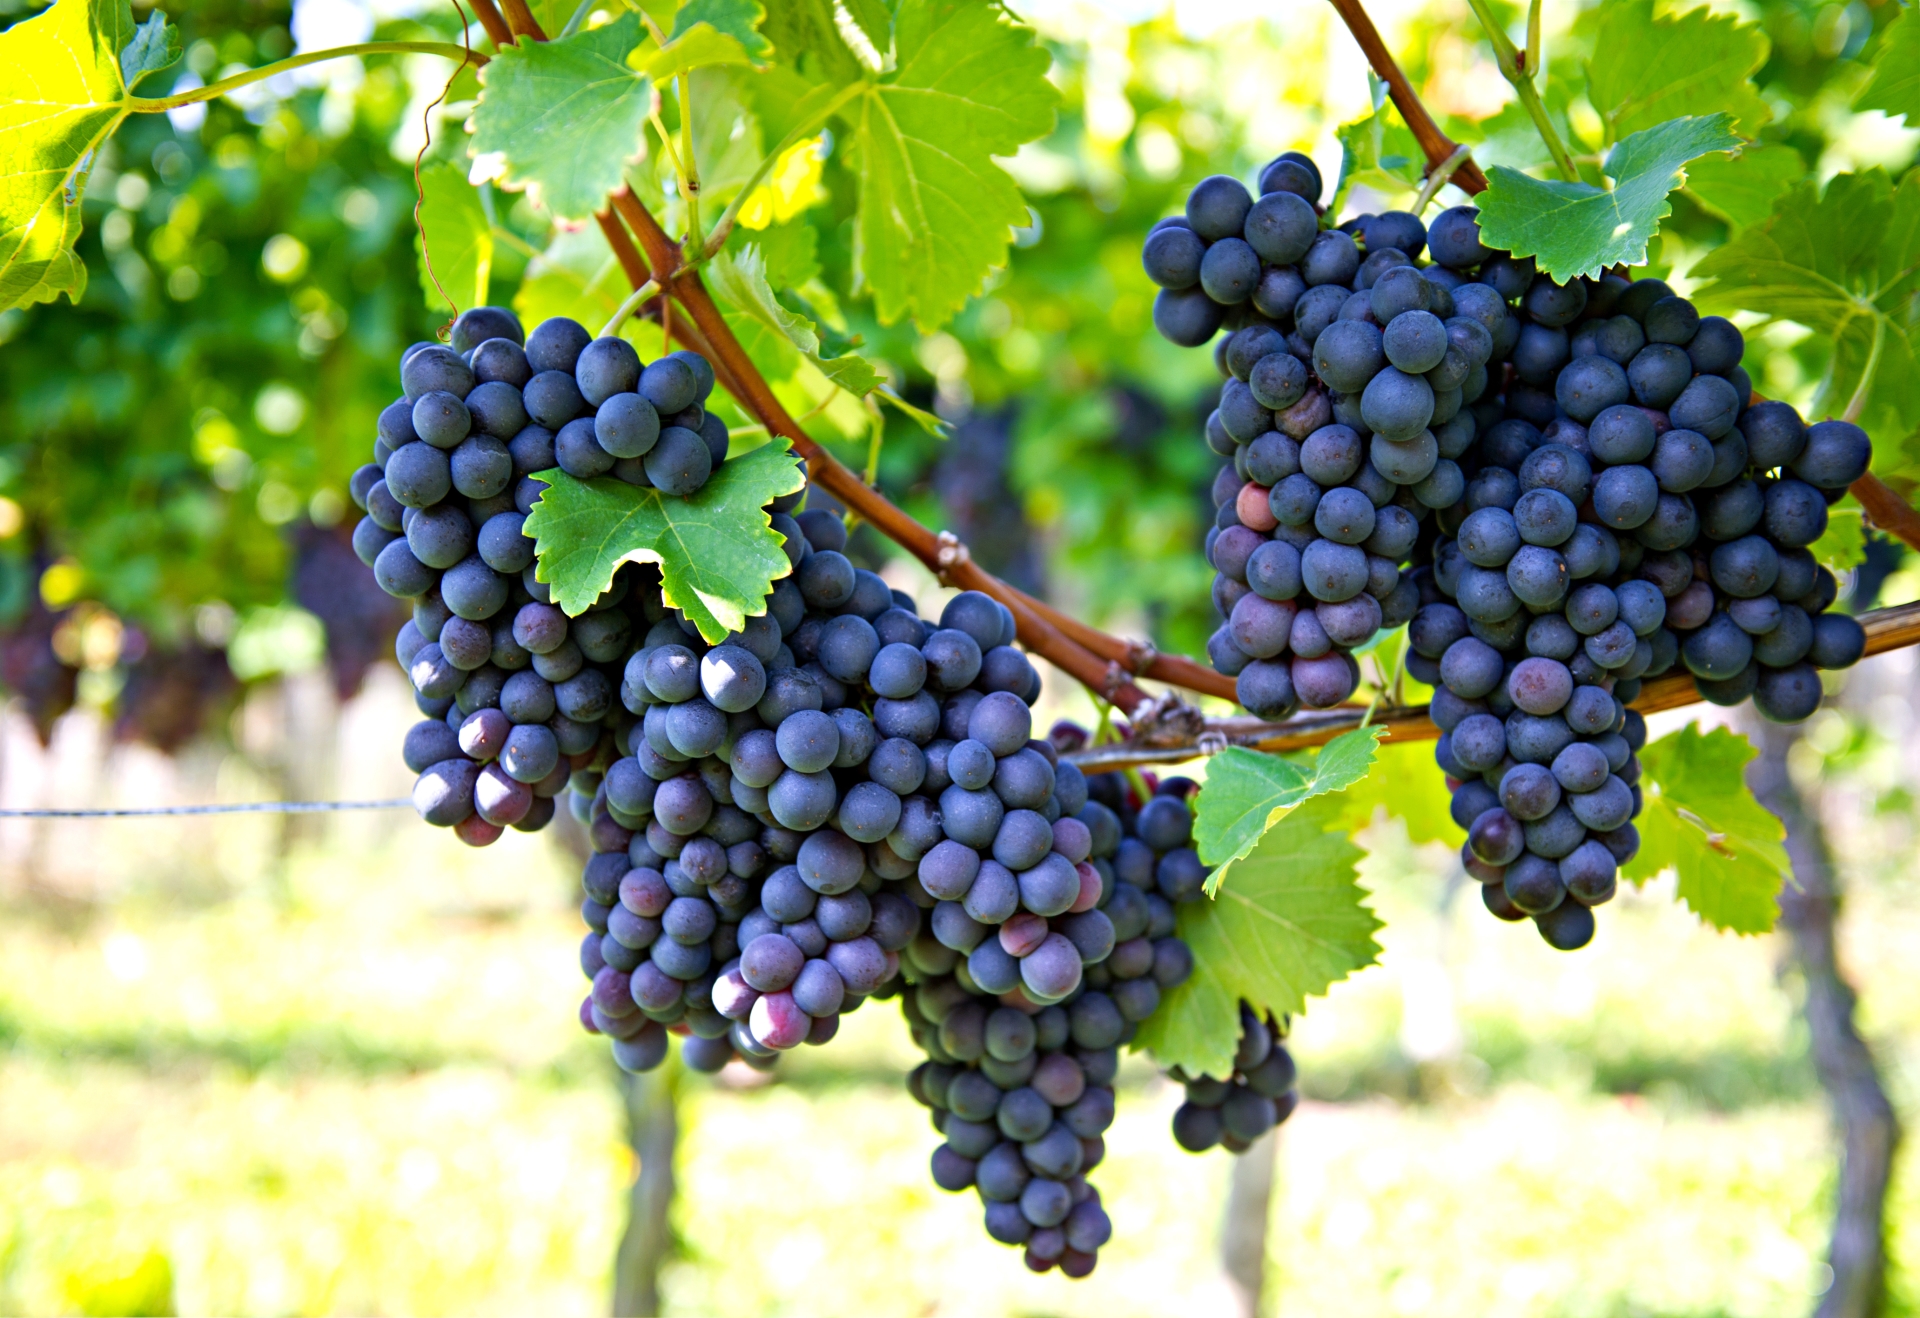 Grapes in the vineyards - 